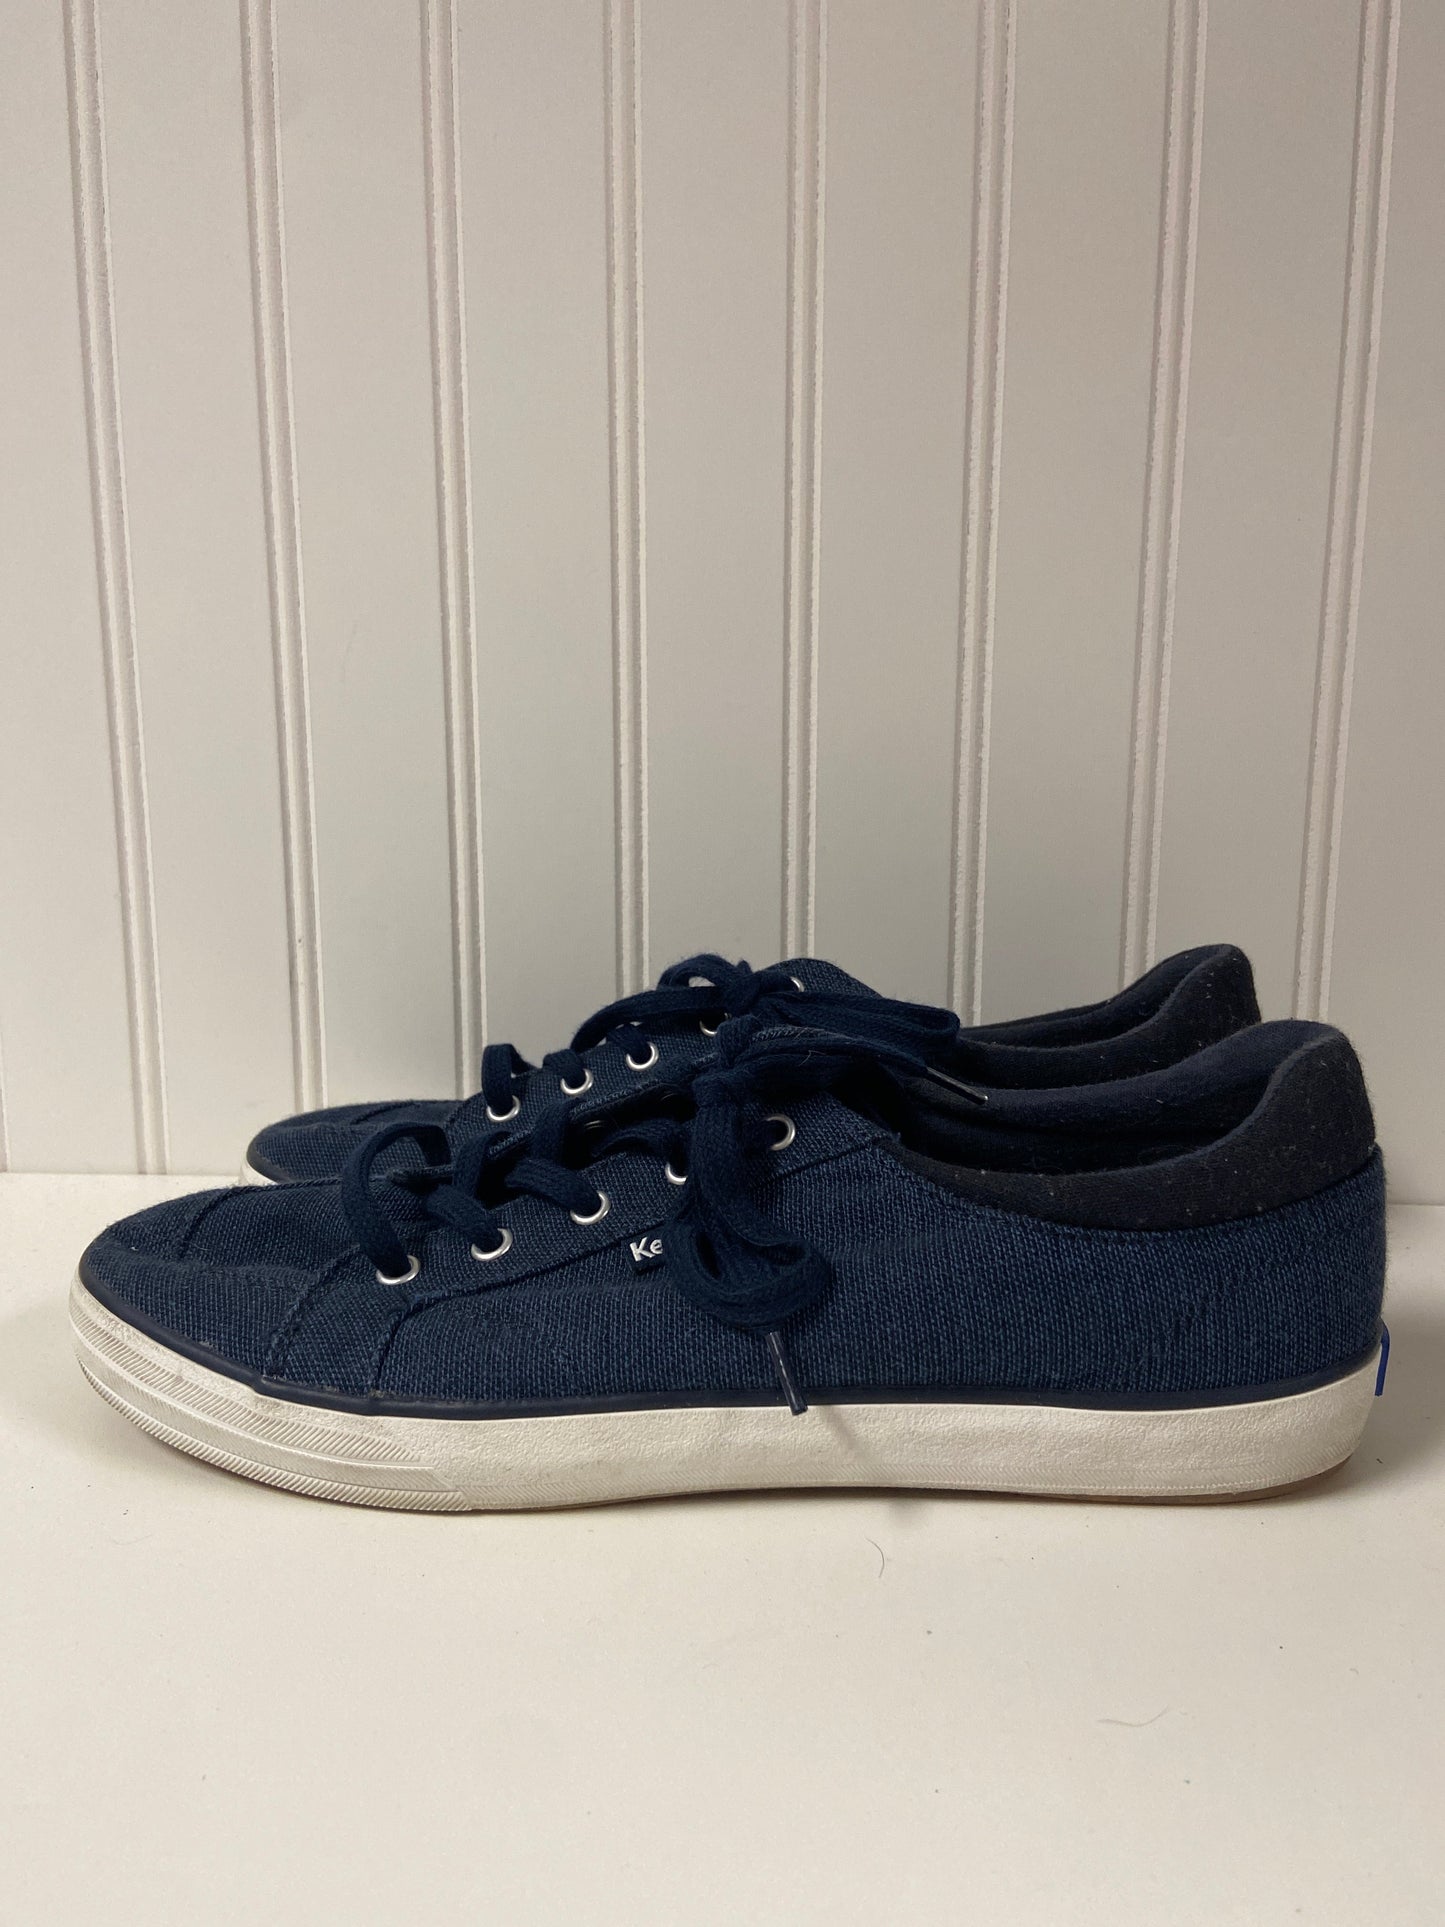 Shoes Flats By Keds  Size: 9.5